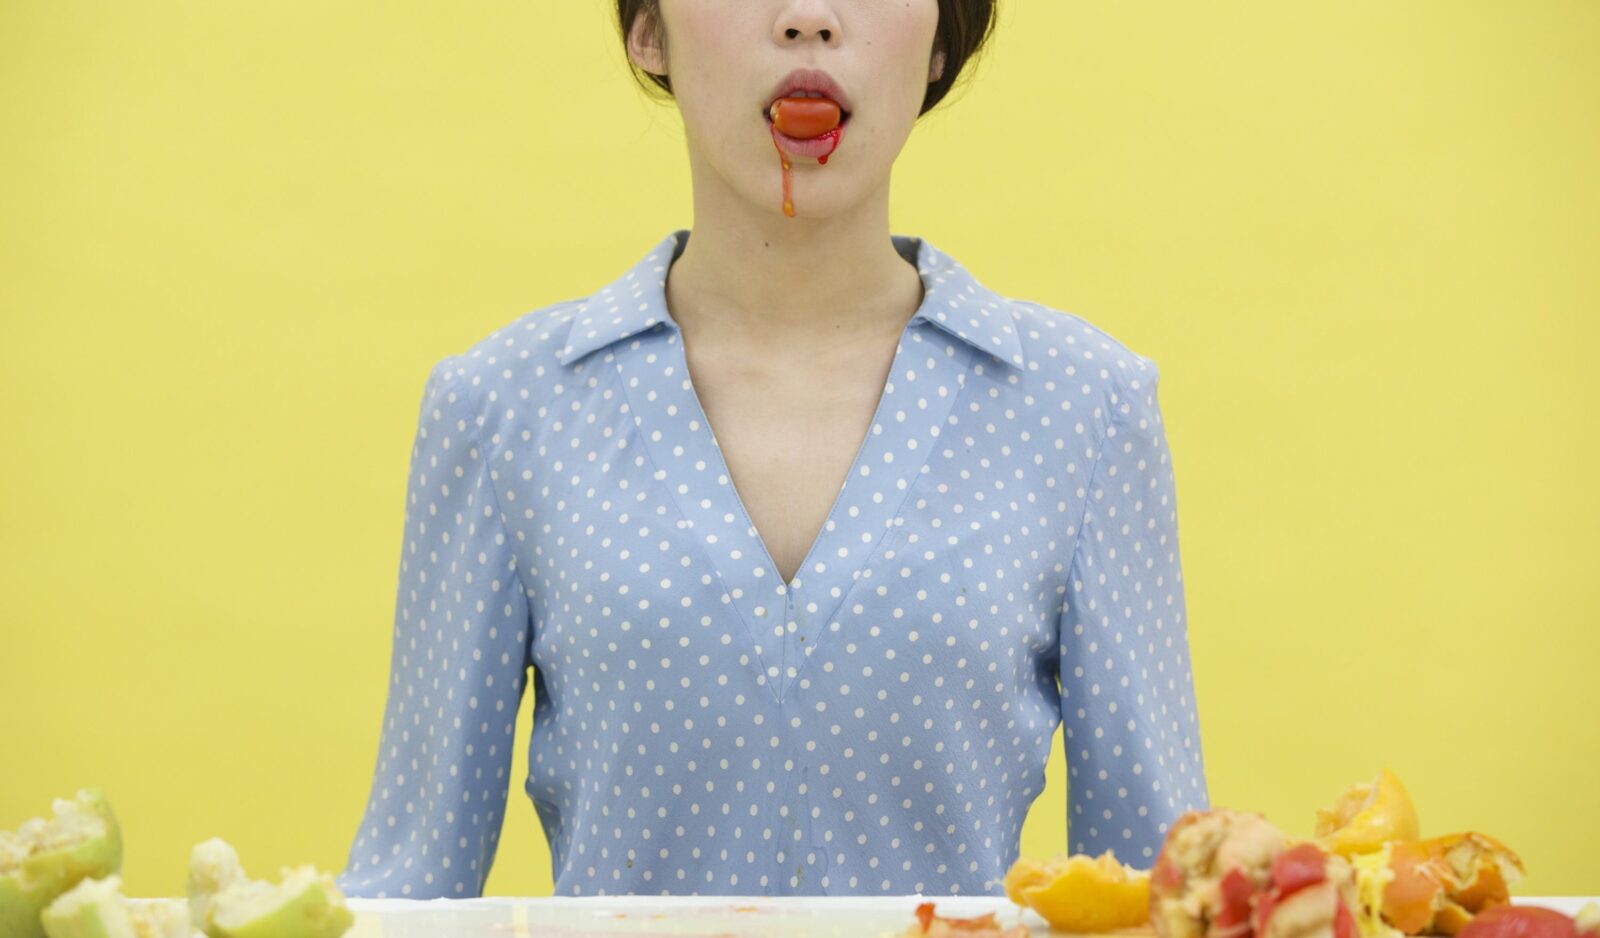 Image of lady in blue polka dot dress with a fruit juice substance drooling from her mouth.